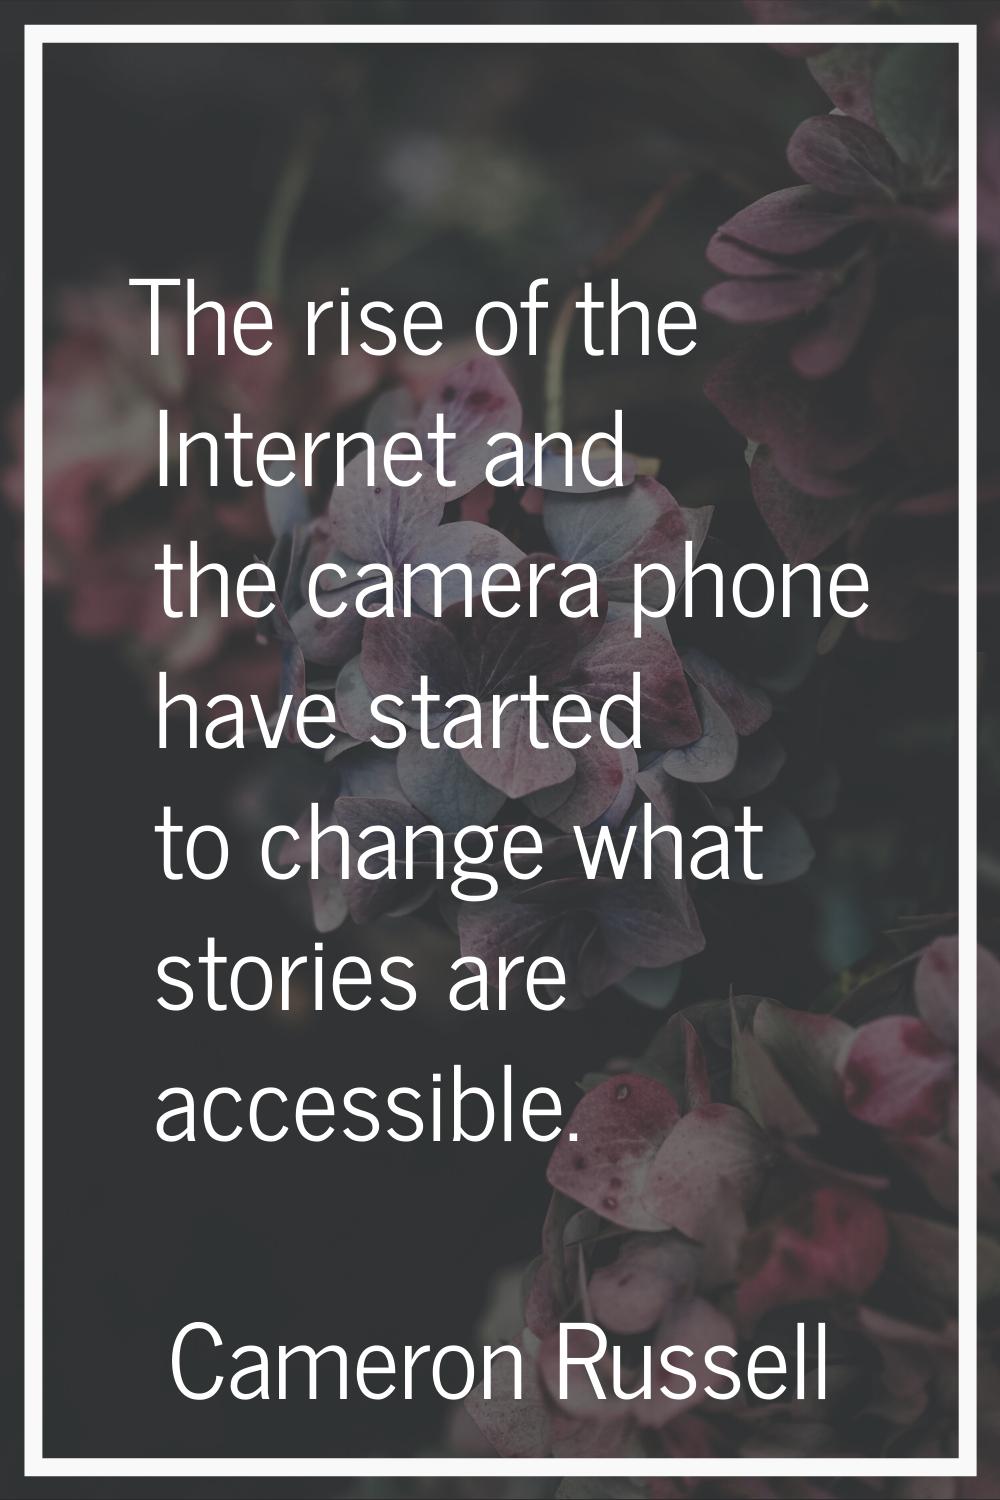 The rise of the Internet and the camera phone have started to change what stories are accessible.